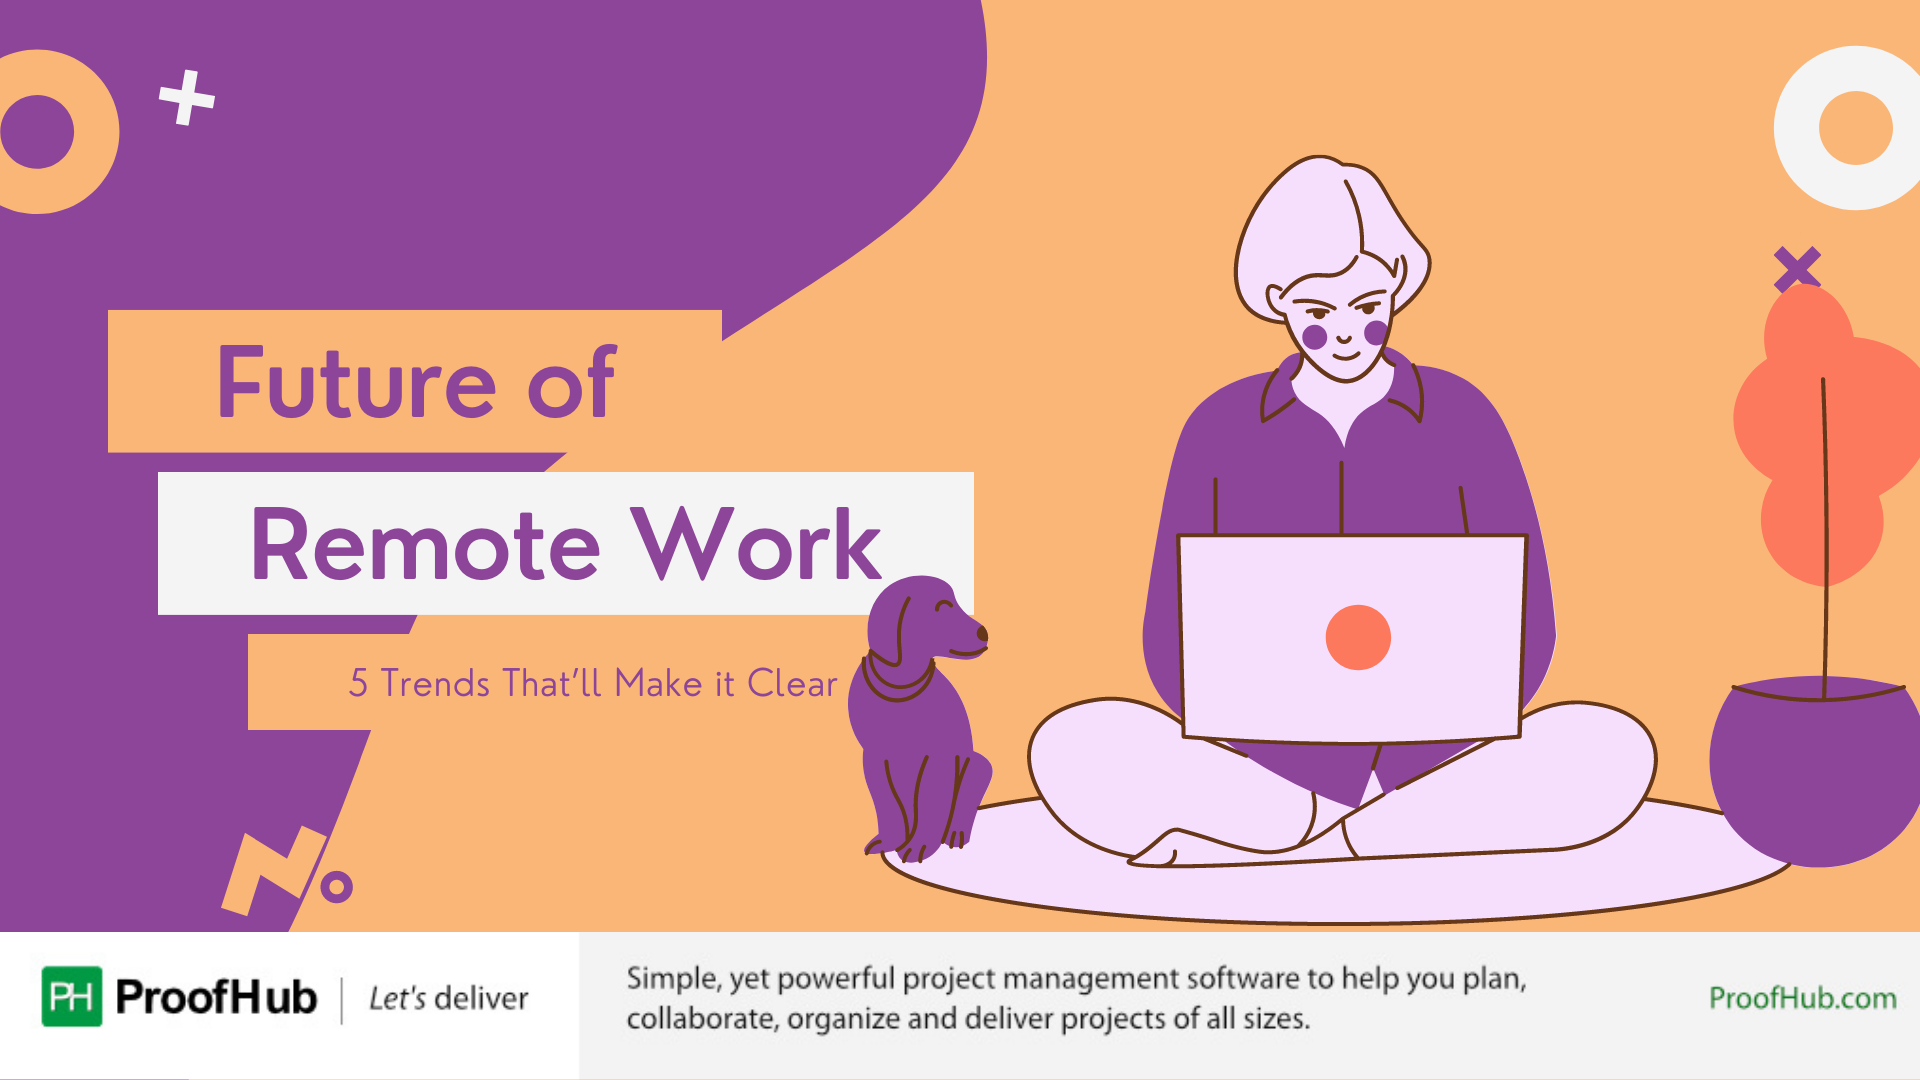 Future of Remote Work: How to be Prepared for it as Per the Trends?